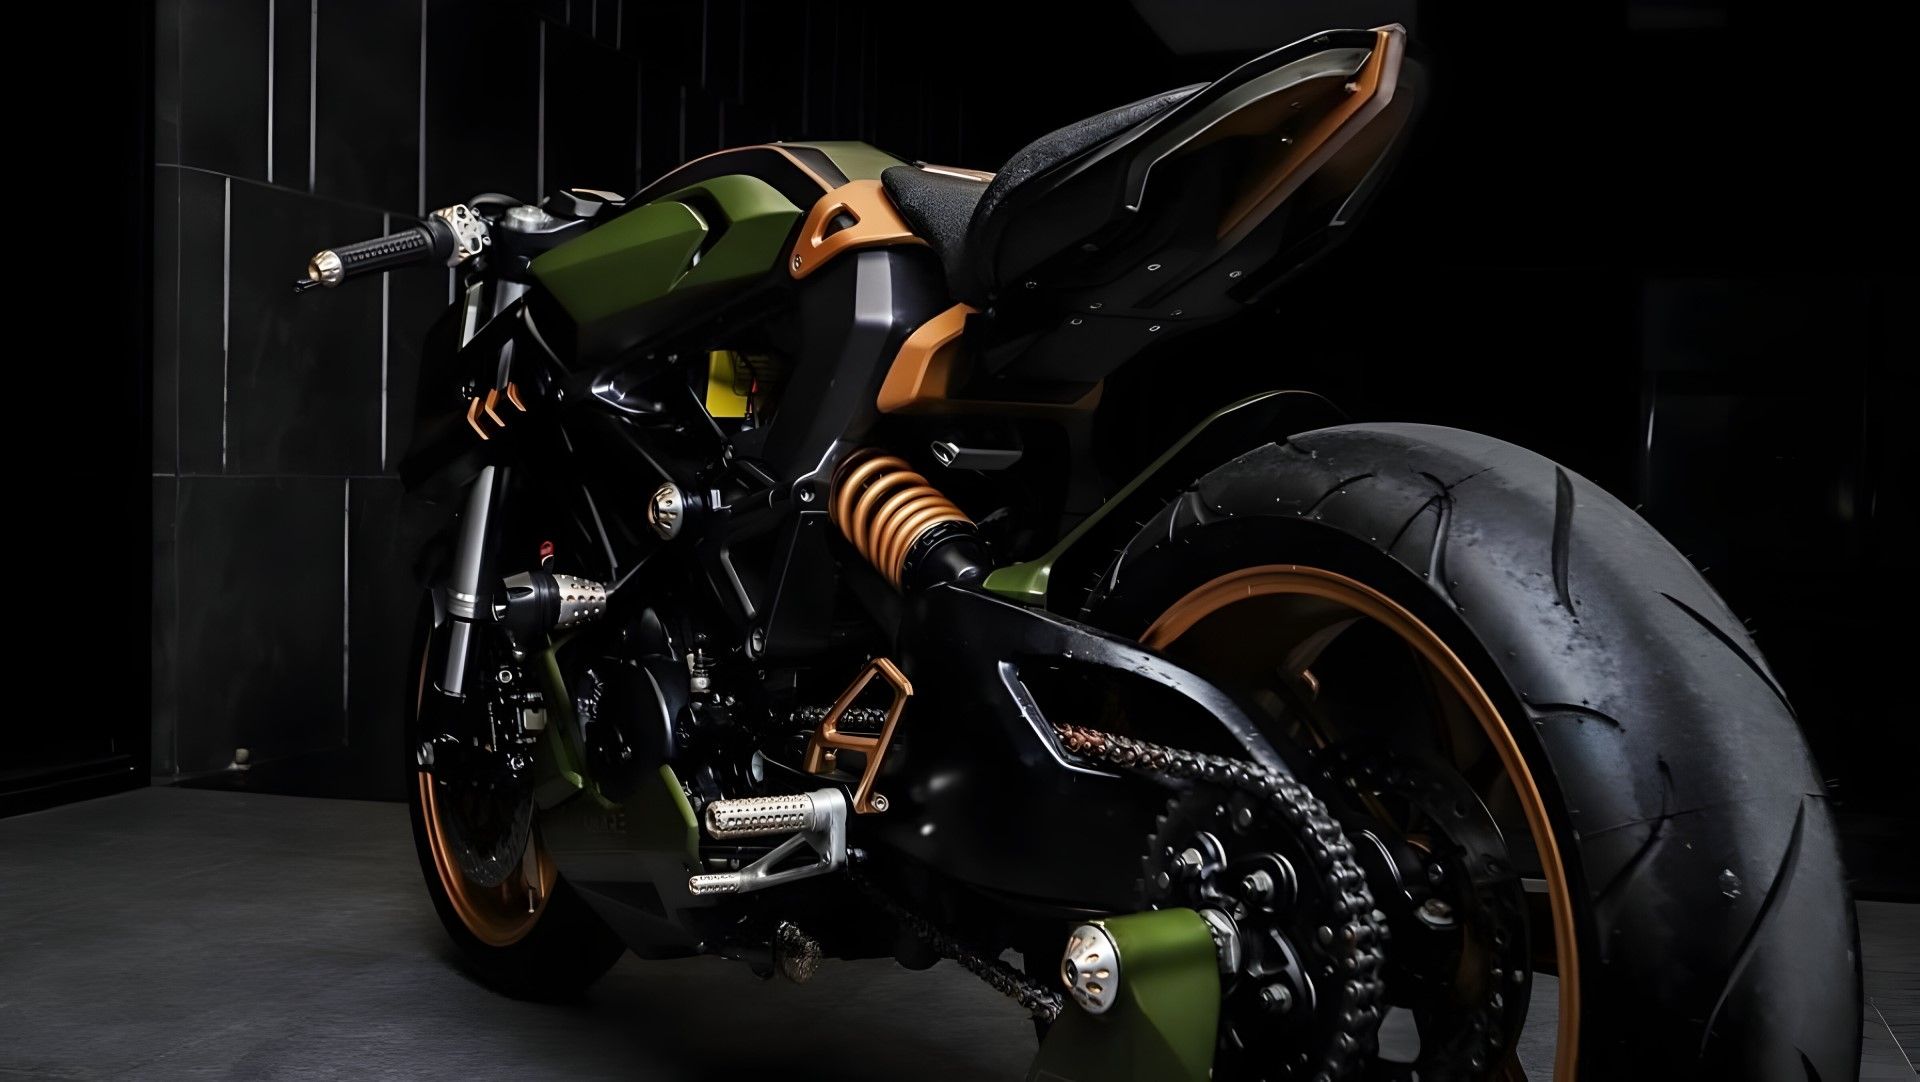 Lambo-Inspired Cafe Racer Is A 10-Year-Old Ducati Underneath